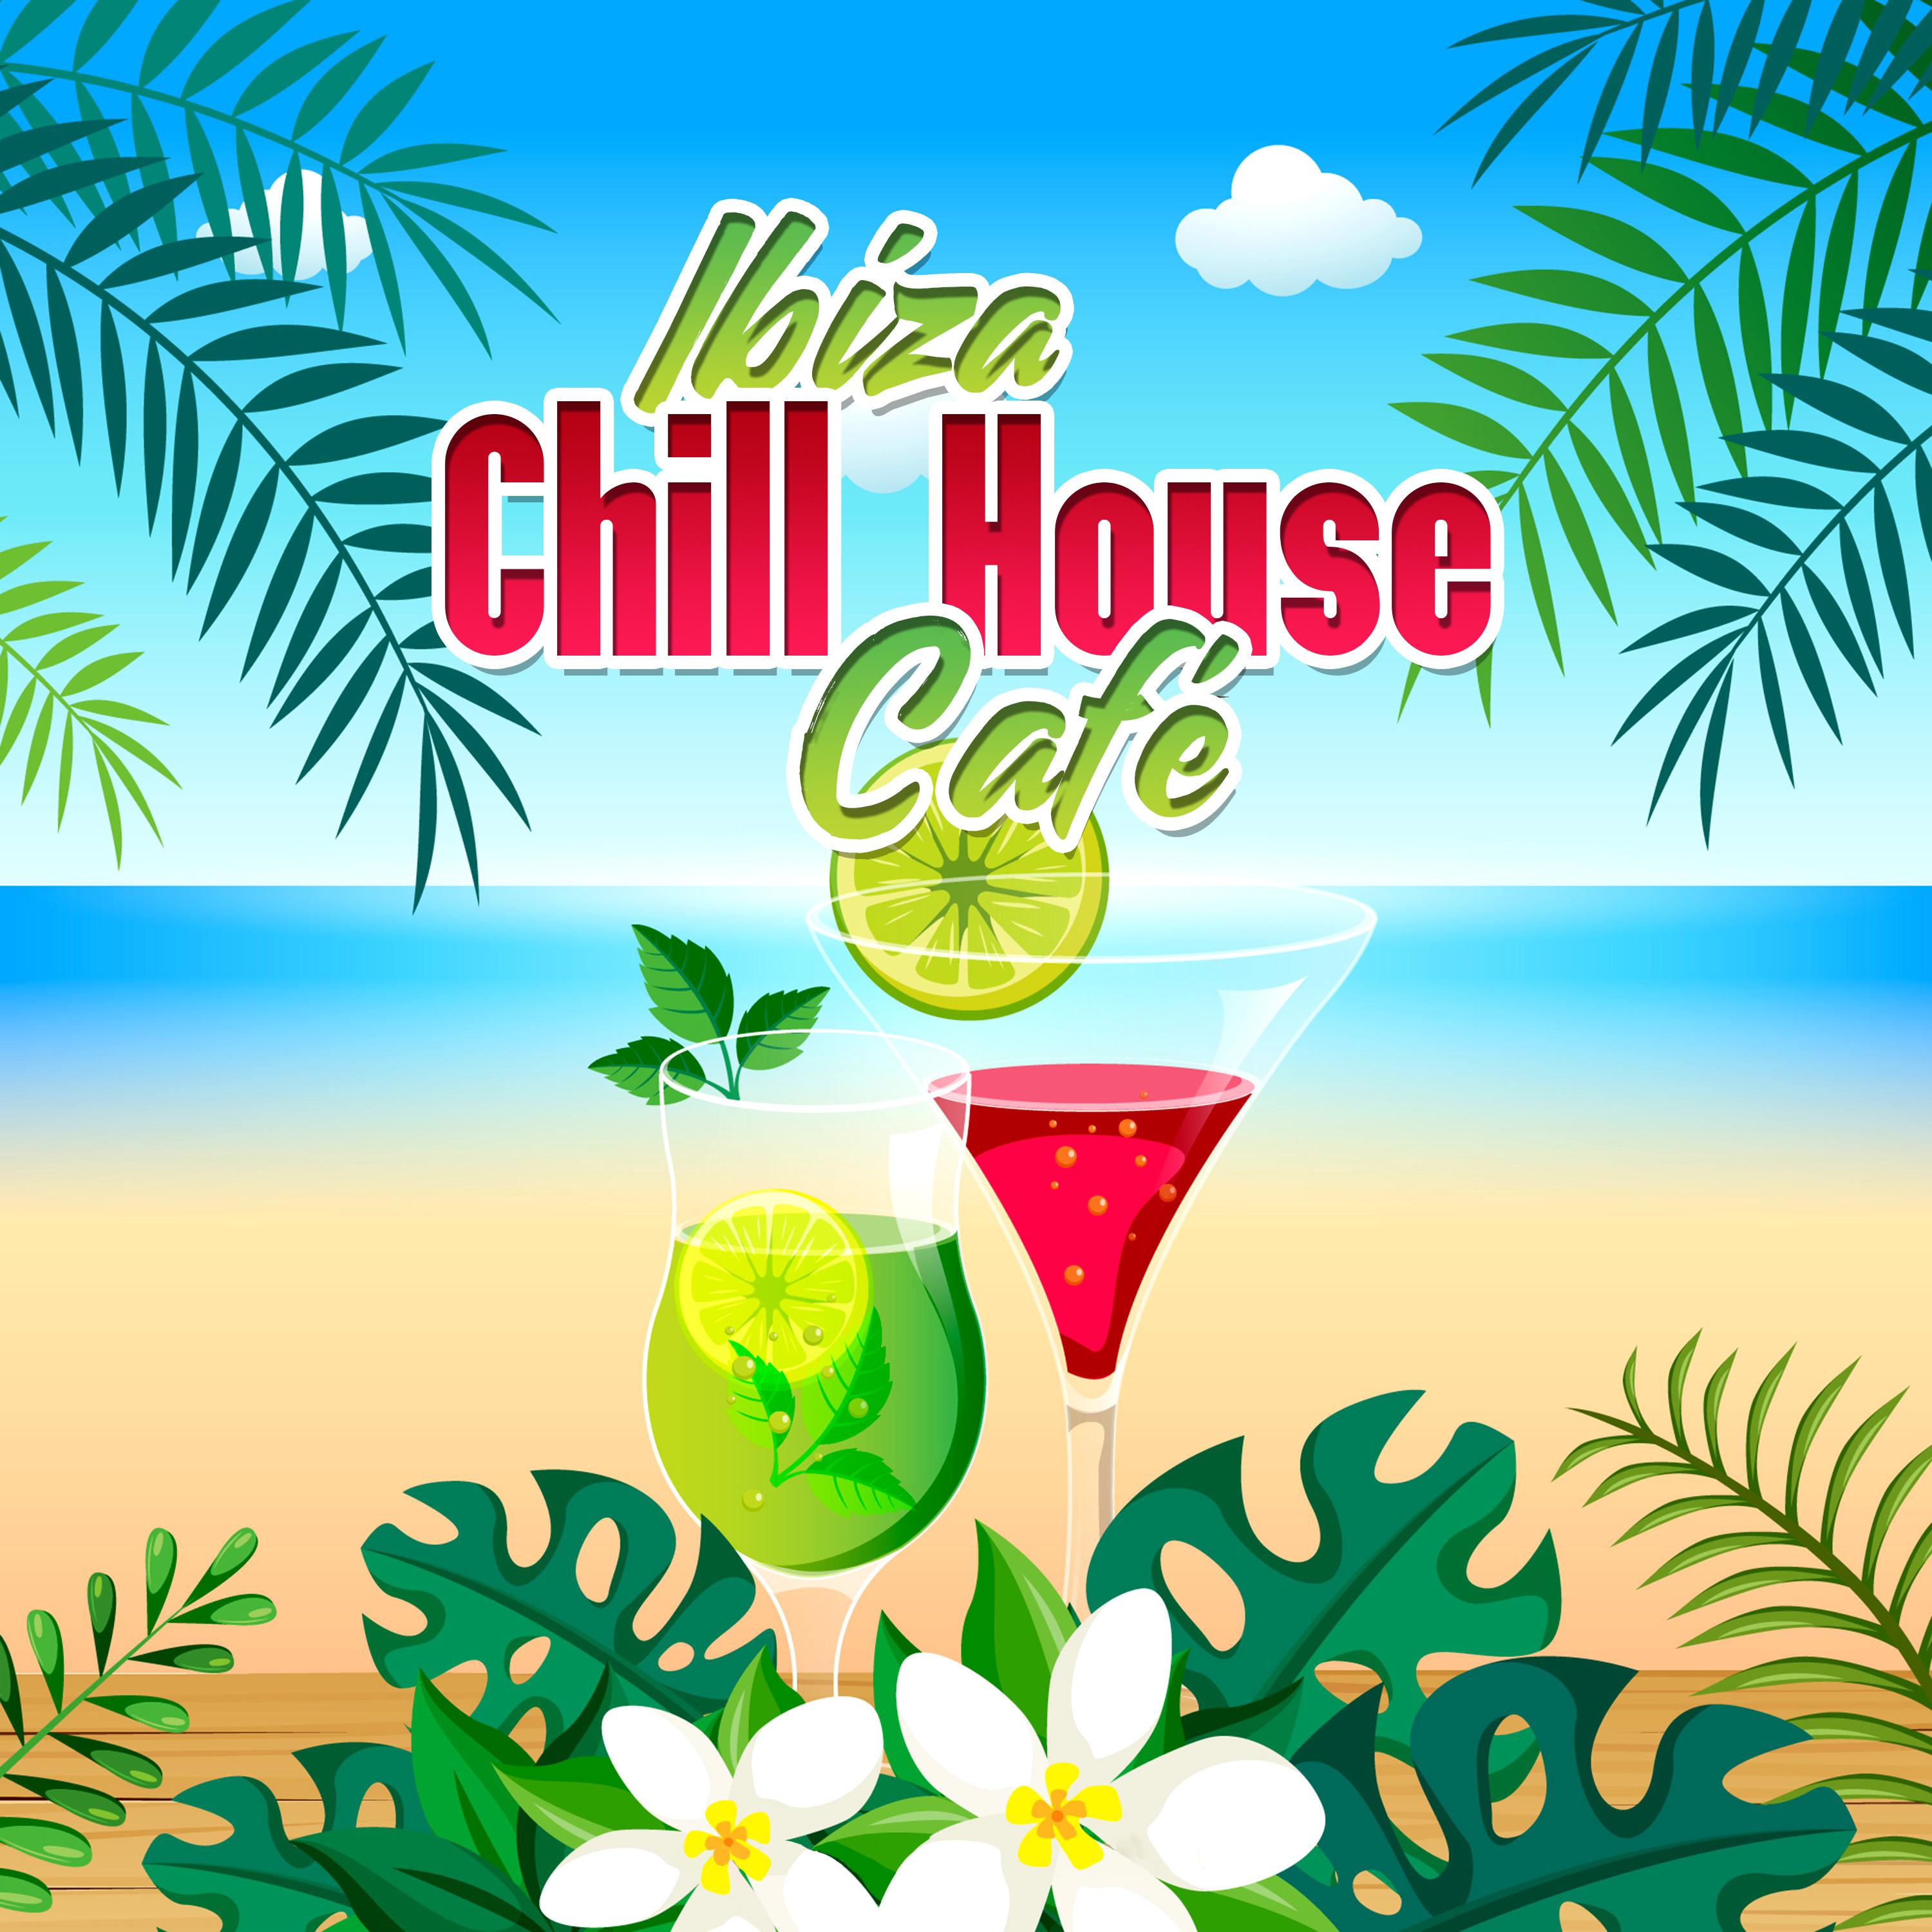 Ibiza Chill House Café (Hot Party Night, After Sunset Background del Mar)